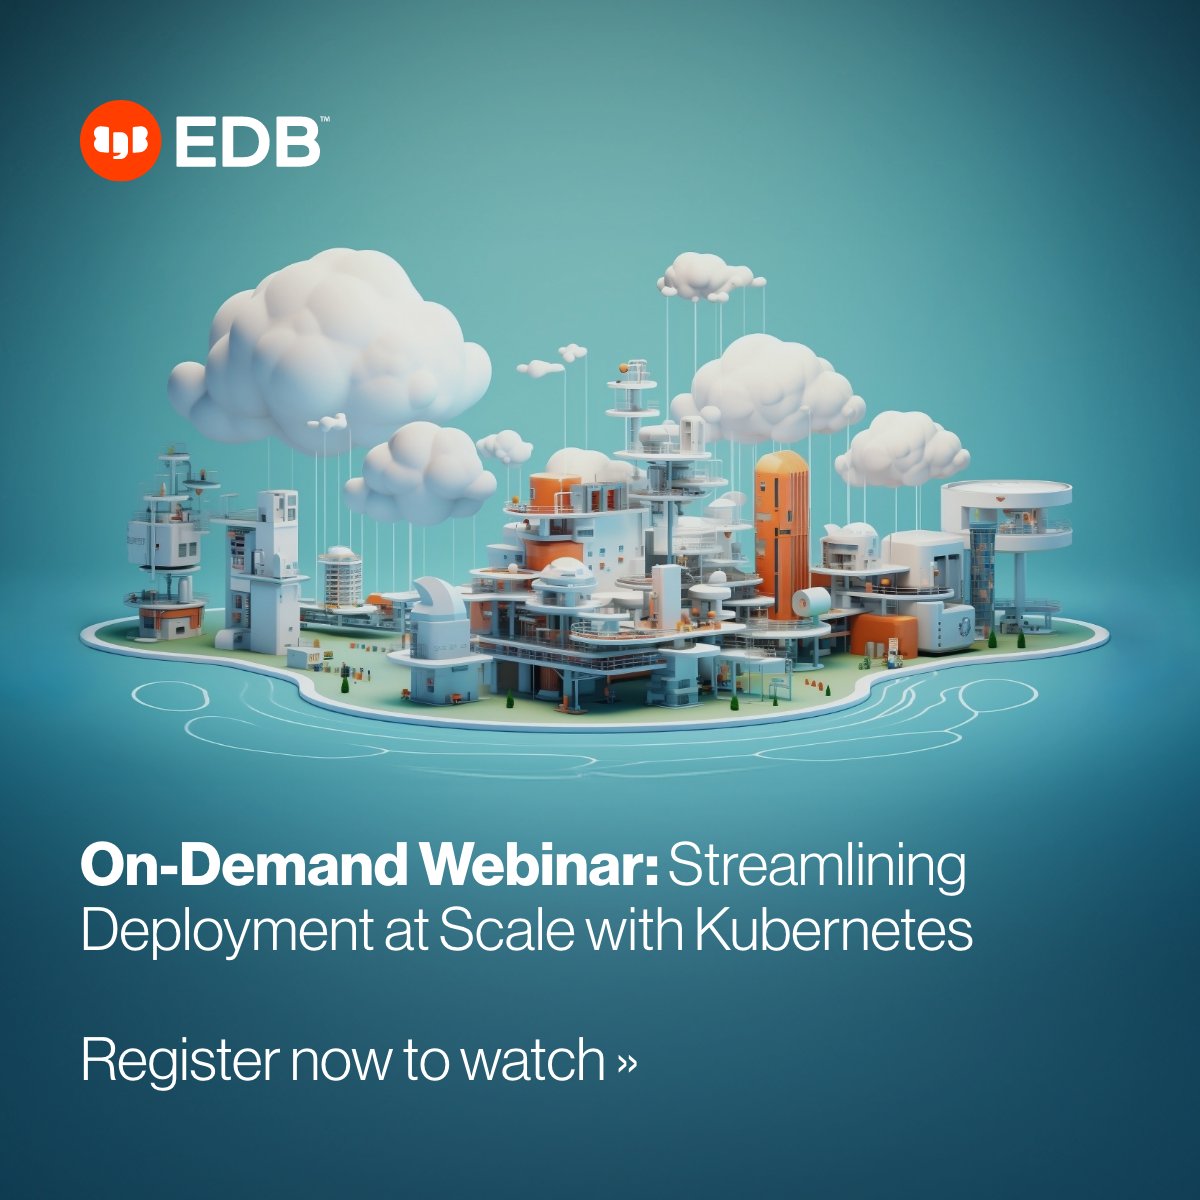 Discover how to scale efficiently with Postgres for #Kubernetes. Watch our on-demand #webinar and learn how to automate #PostgreSQL deployment, scaling, tuning, and optimization to modernize your IT infrastructure. Register now: bit.ly/3JInd62 #tech #developer